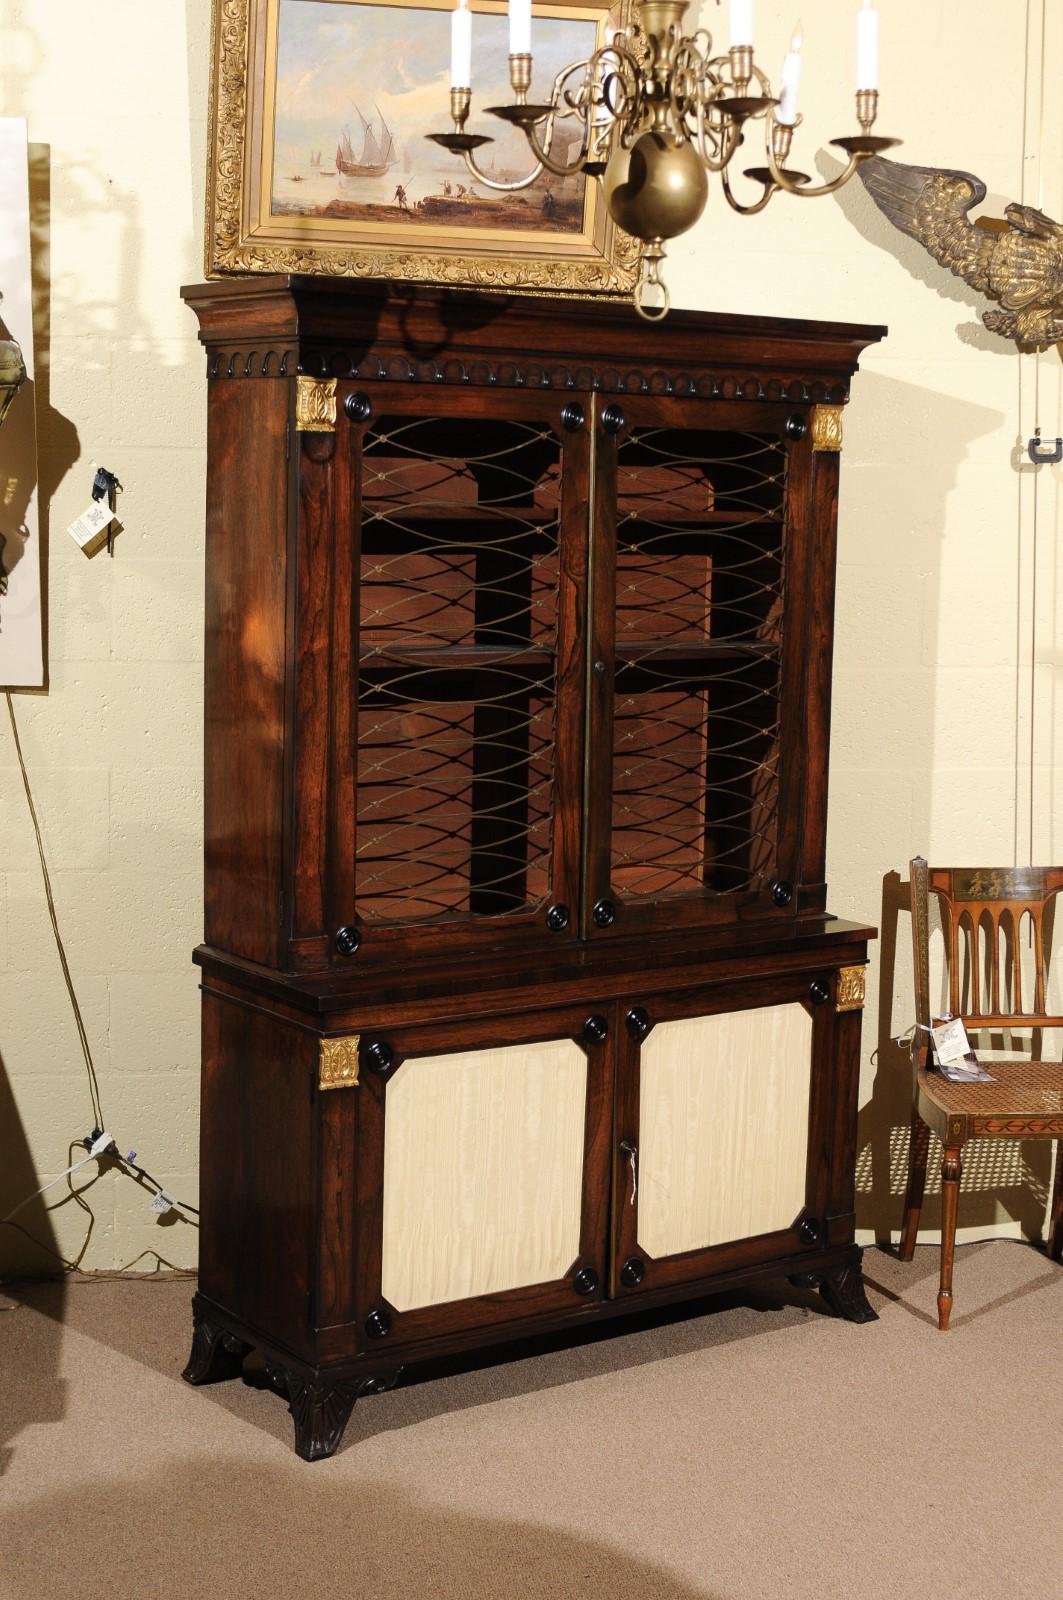 19th Century English Regency Style Rosewood Bookcase/Cabinet with Gilt Accents For Sale 6